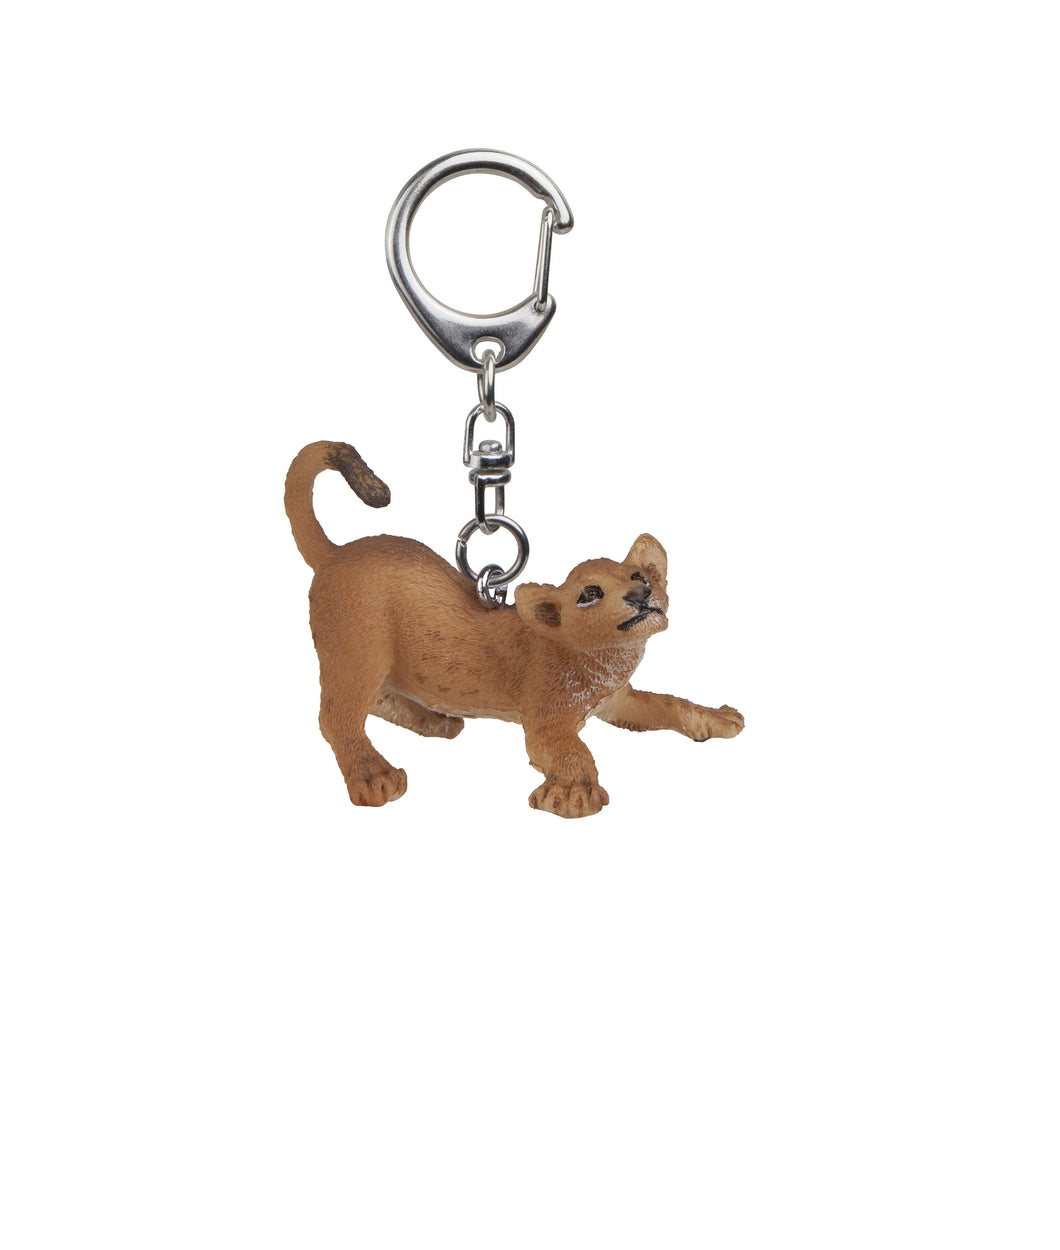 Papo France Key Chains - Playing Young Lion